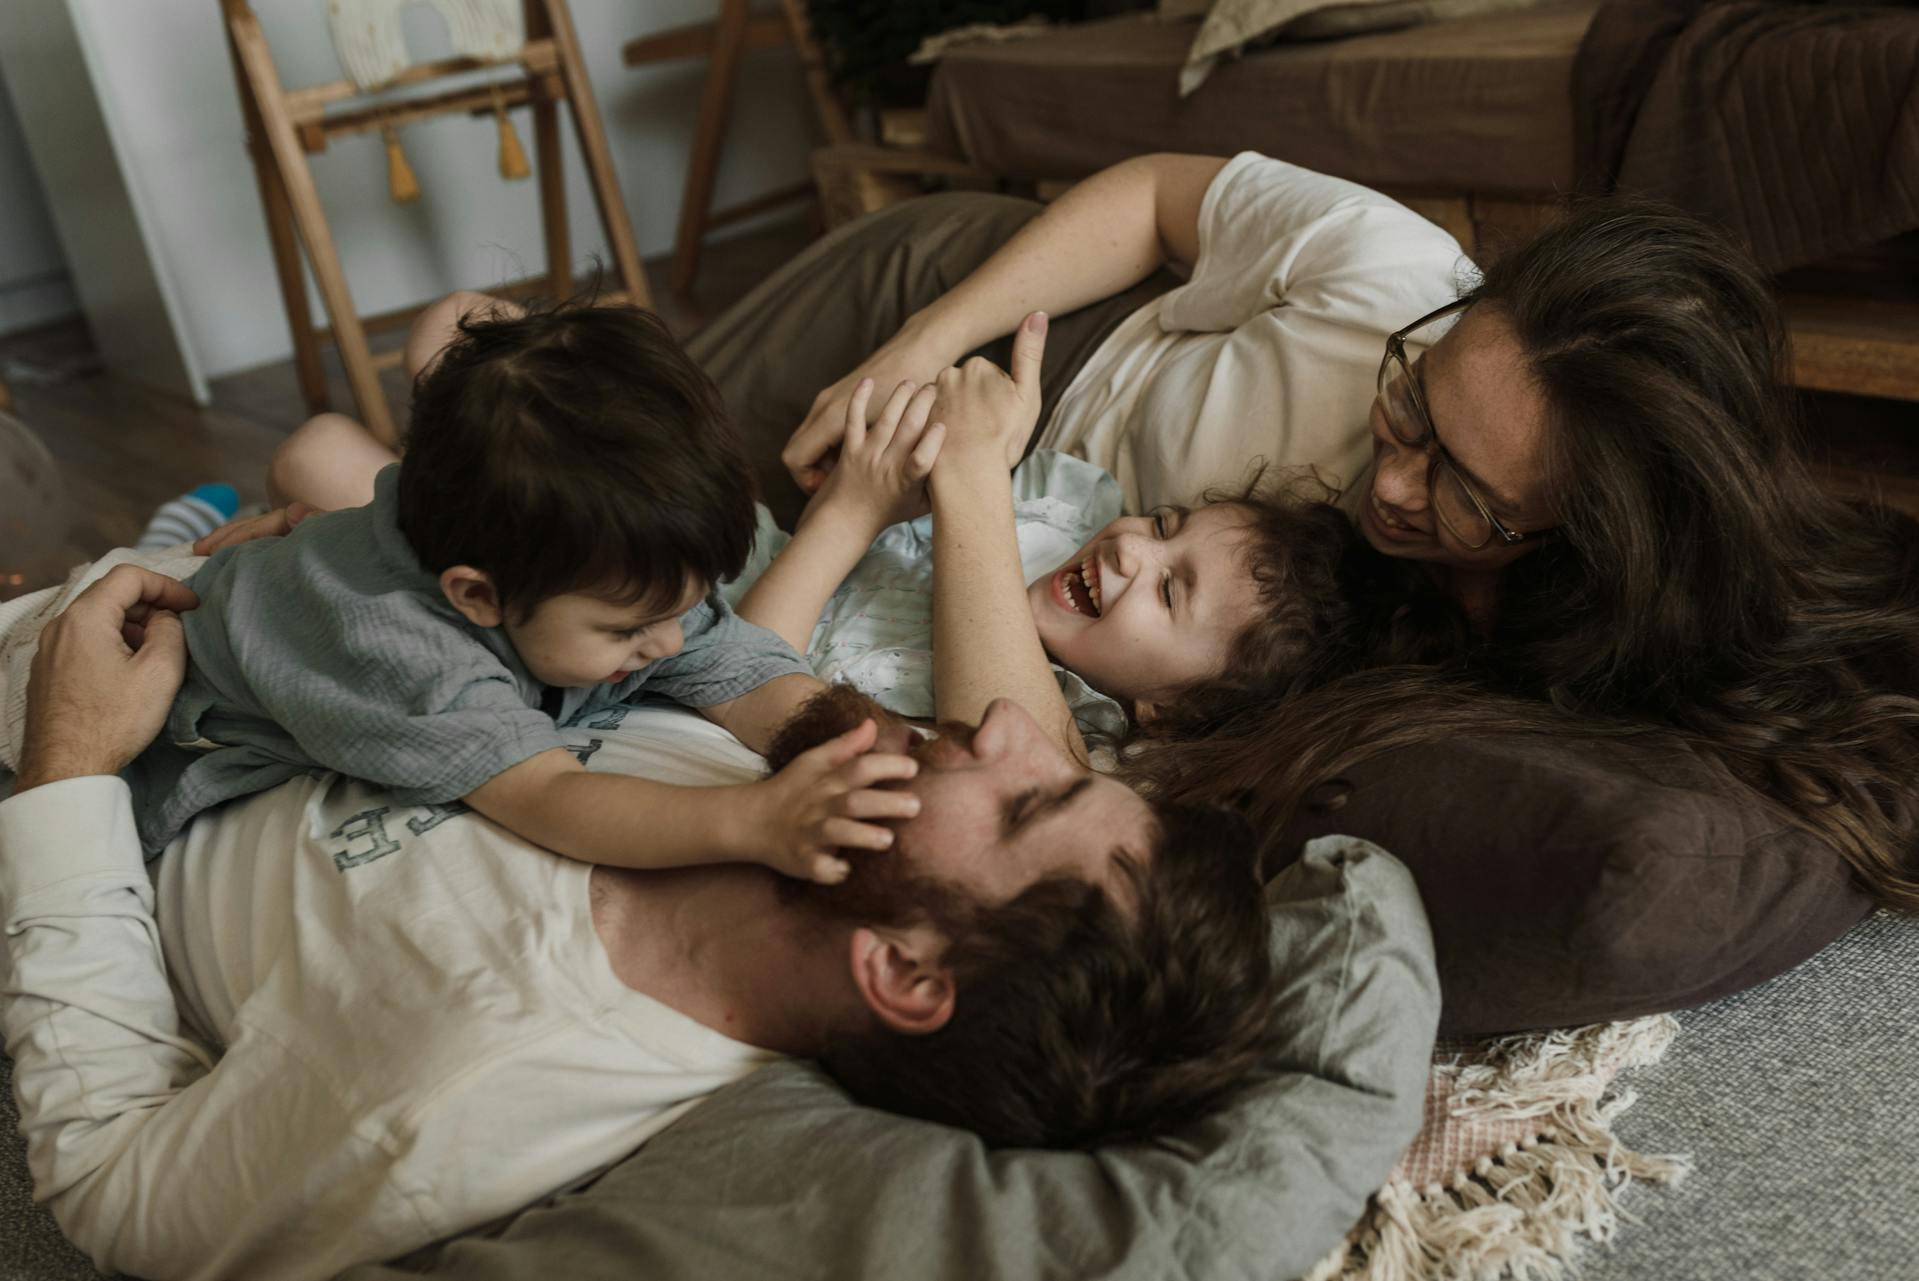 A family of four lay together laughing and playing.